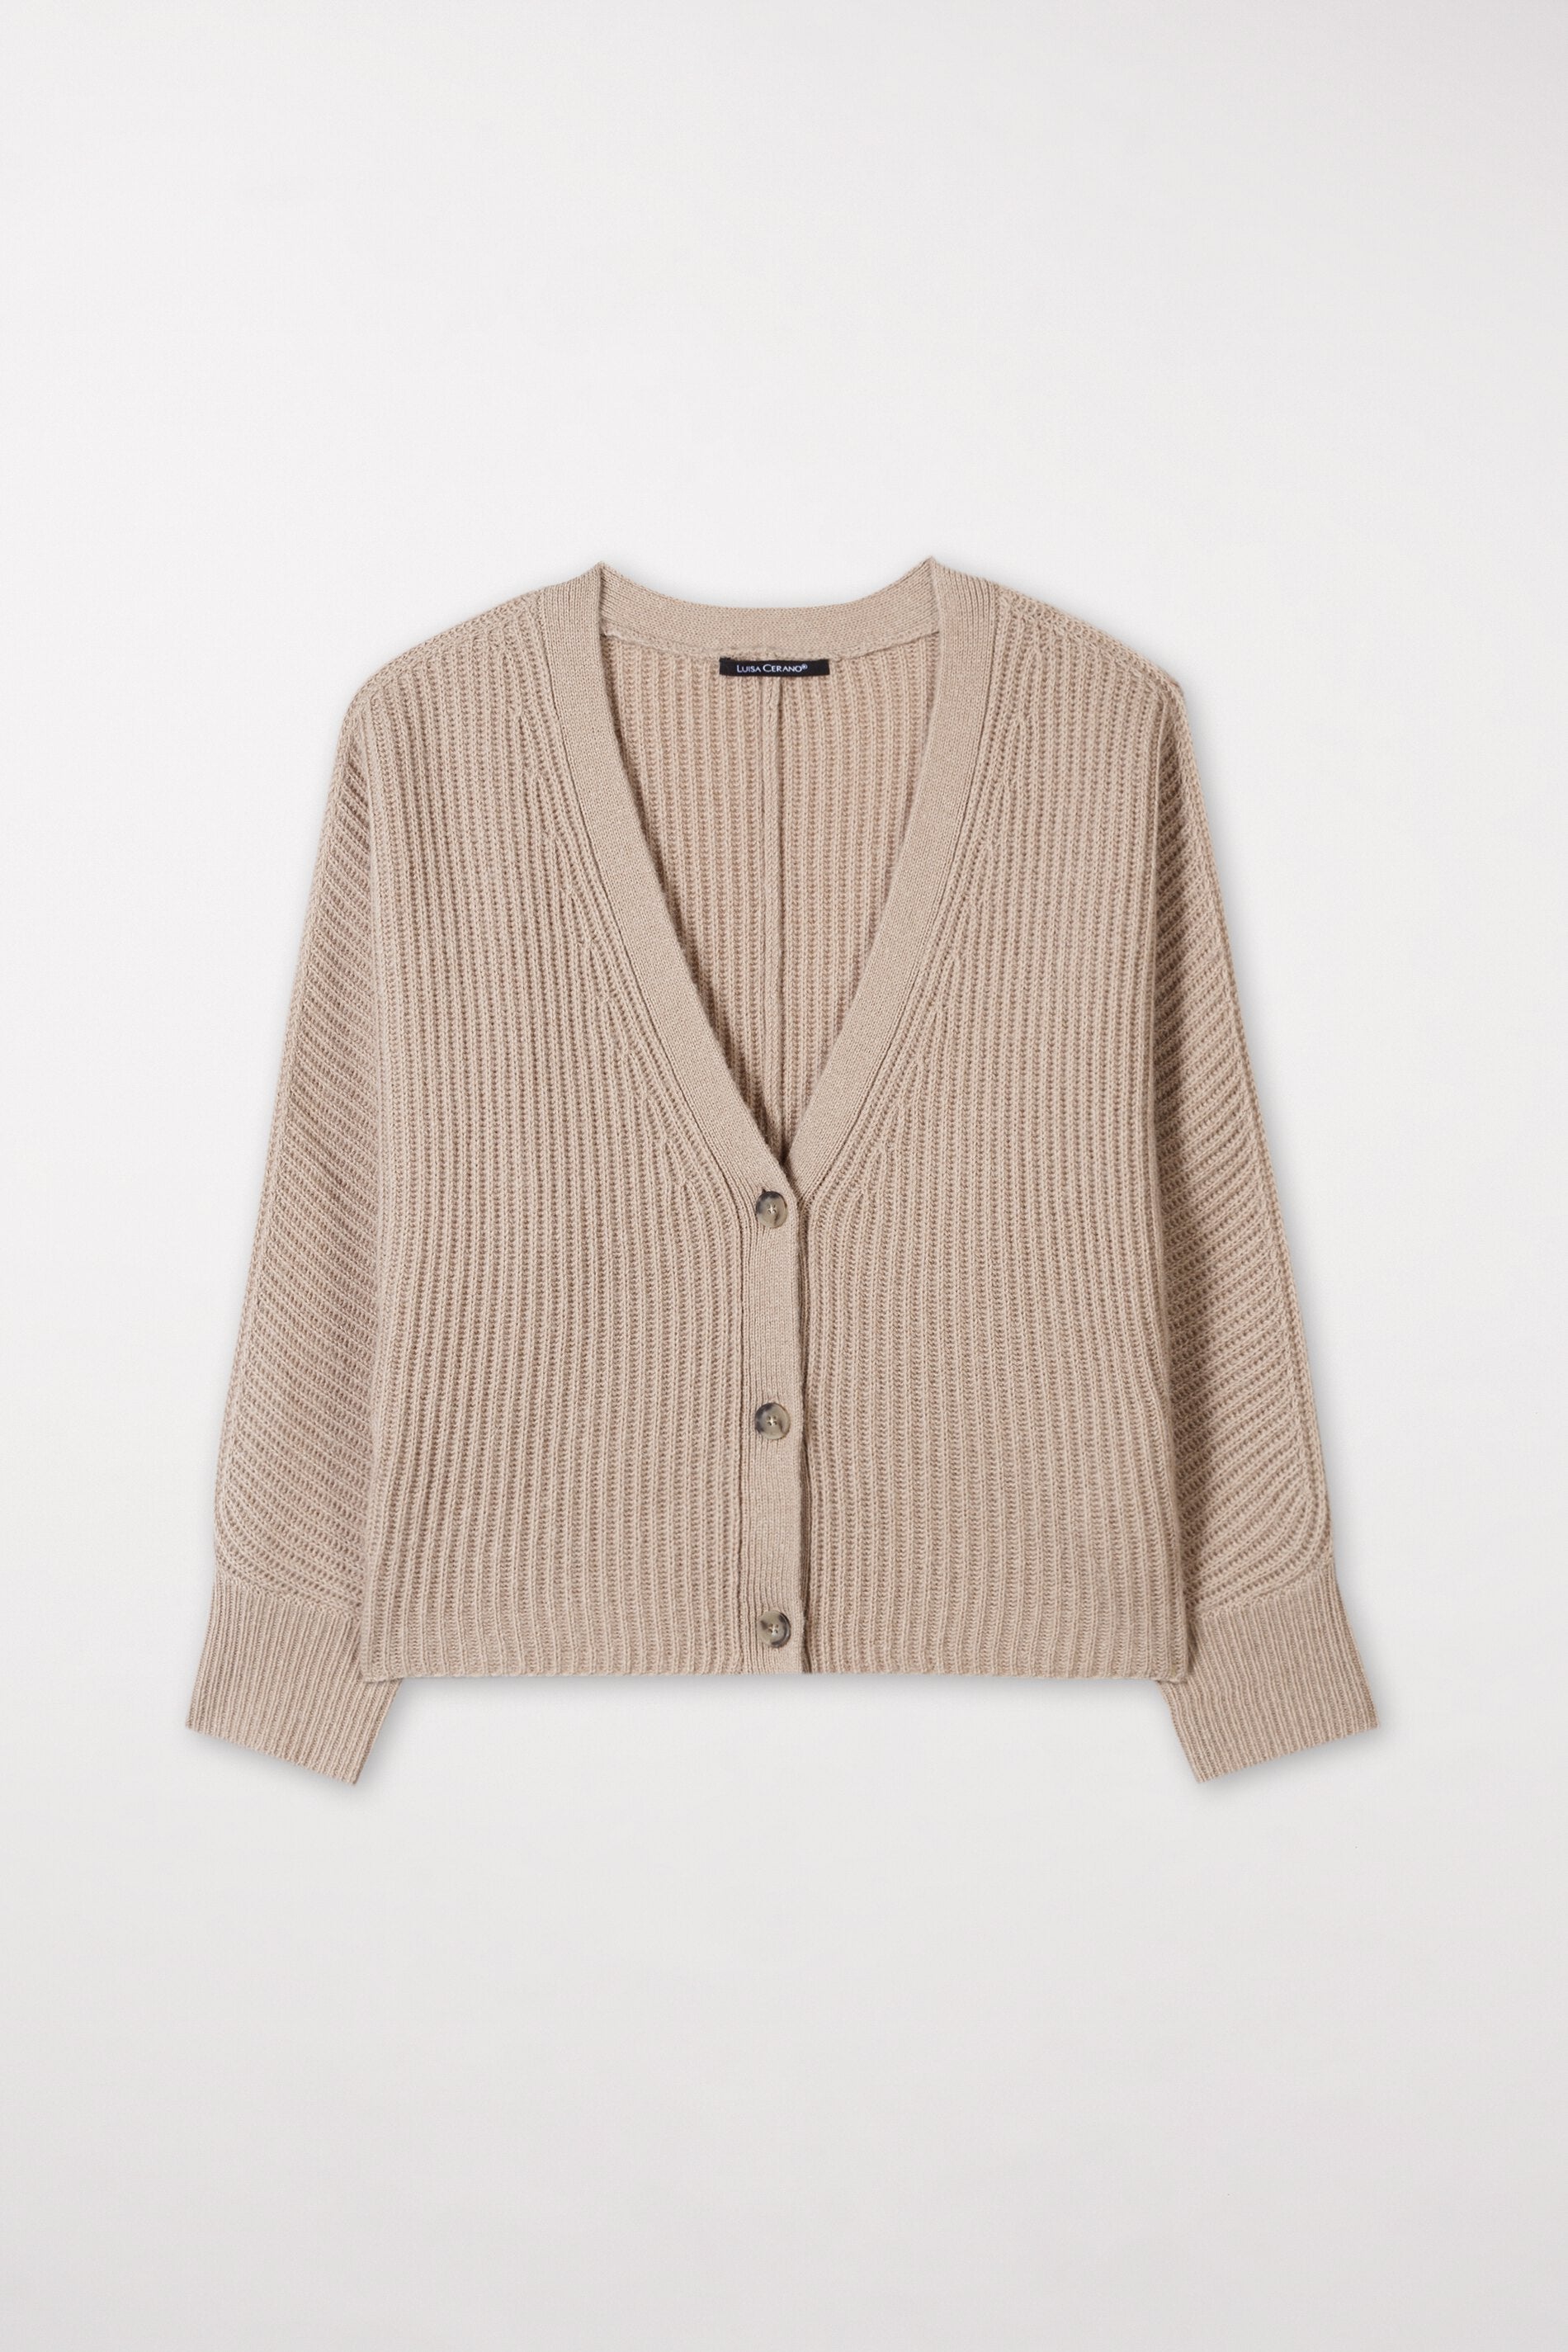 LUISA CERANO-OUTLET-SALE-Cardigan aus Woll-Mix-Strick-34-sand-by-ARCHIVIST